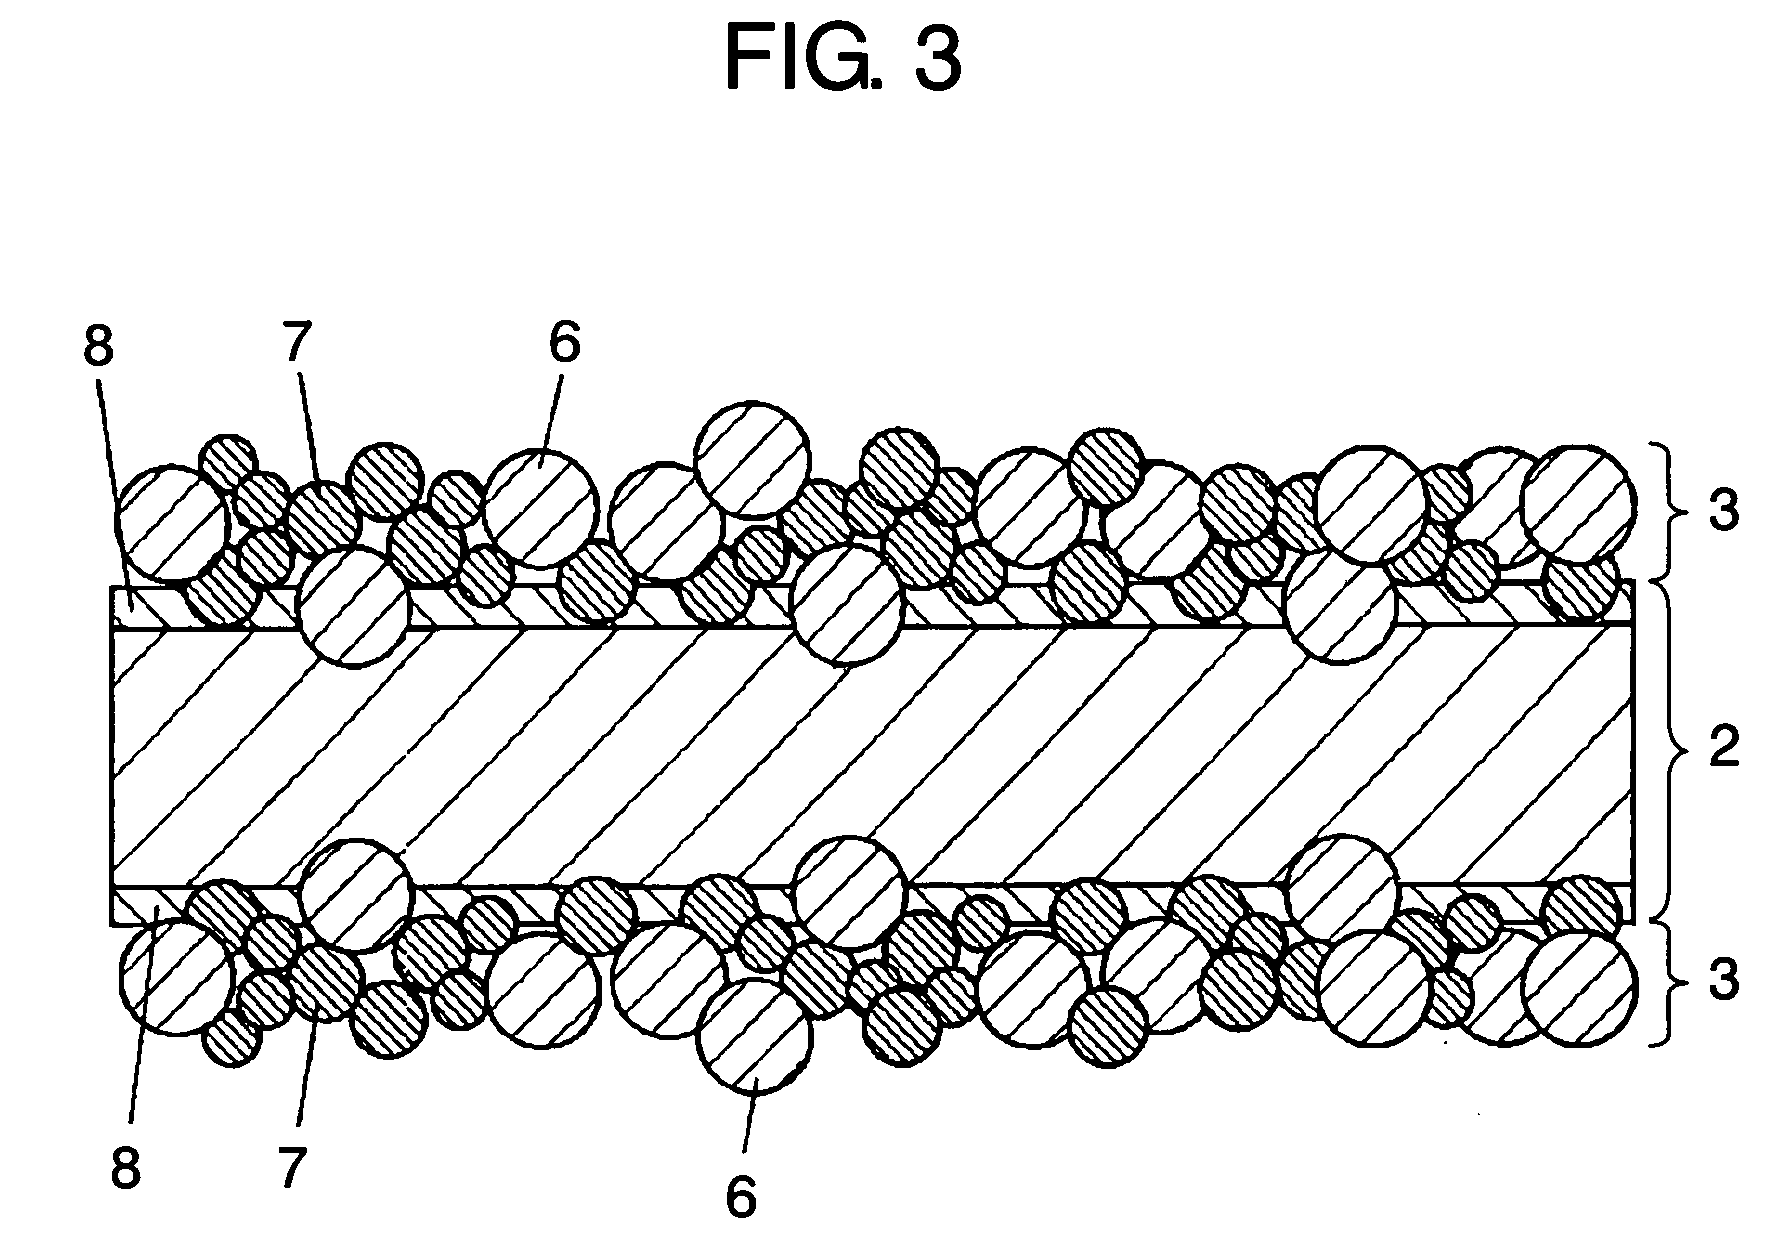 Polarizable electrode member, process for producing the same, and electrochemical capacitor utilizing the member